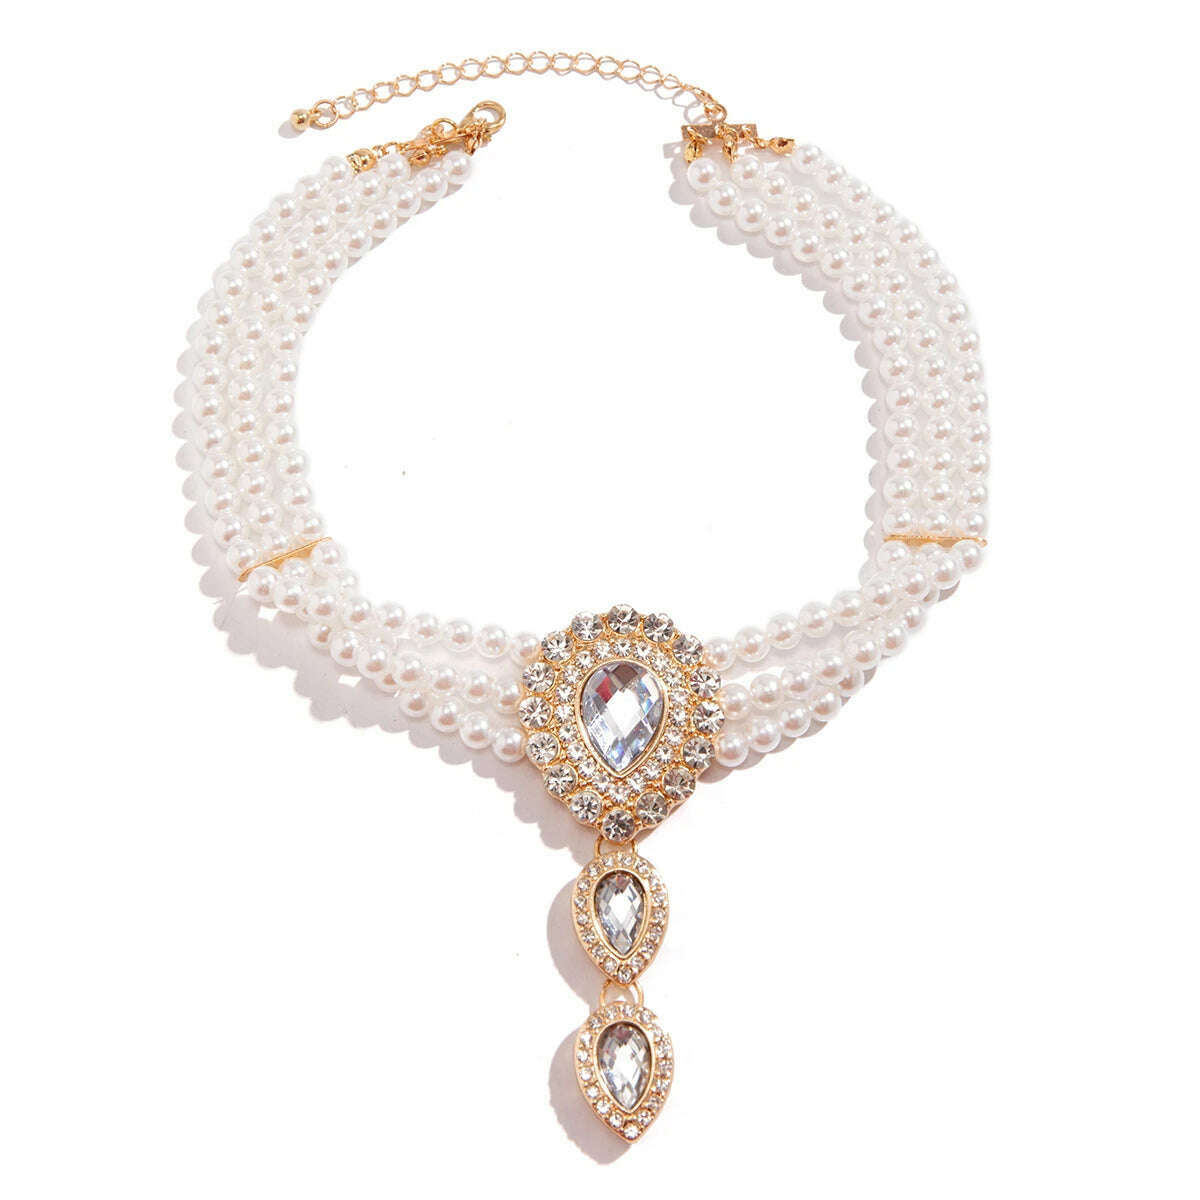 KIMLUD, Multilayer Elegant Imitation Pearl Chain Necklace Bracelet for Women Creative Water Drop Rhinestone Jewelry Set Wed Accessories, KIMLUD Womens Clothes